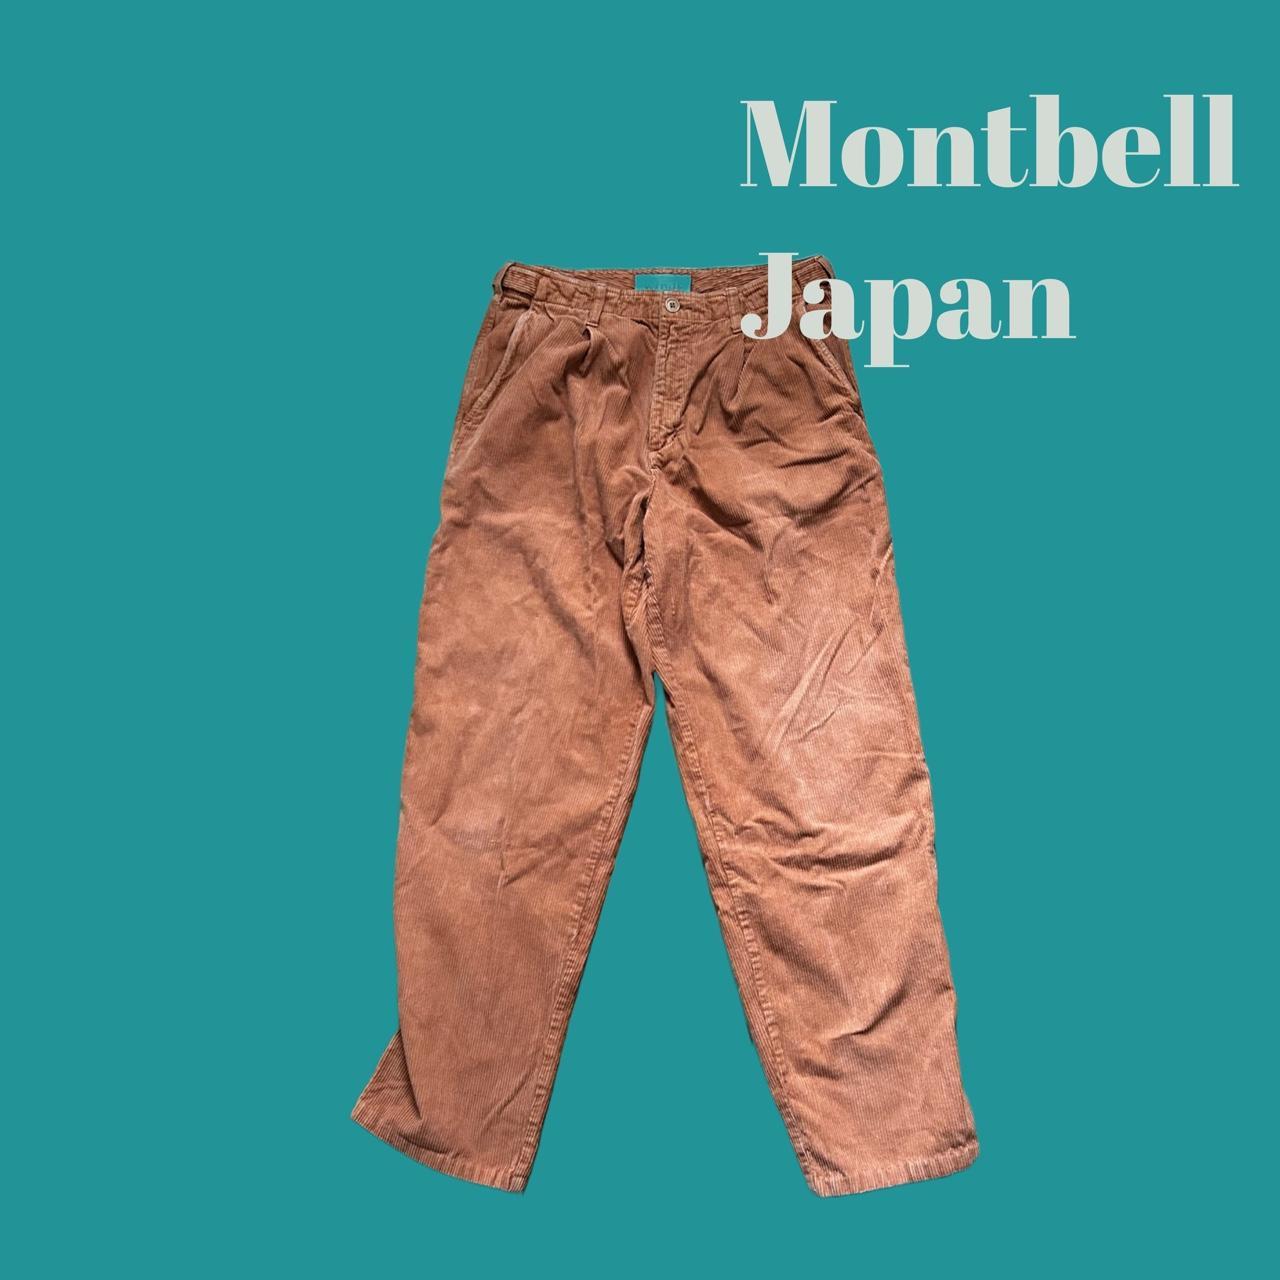 MontBell Mountain Strider Pants Reviews - Trailspace